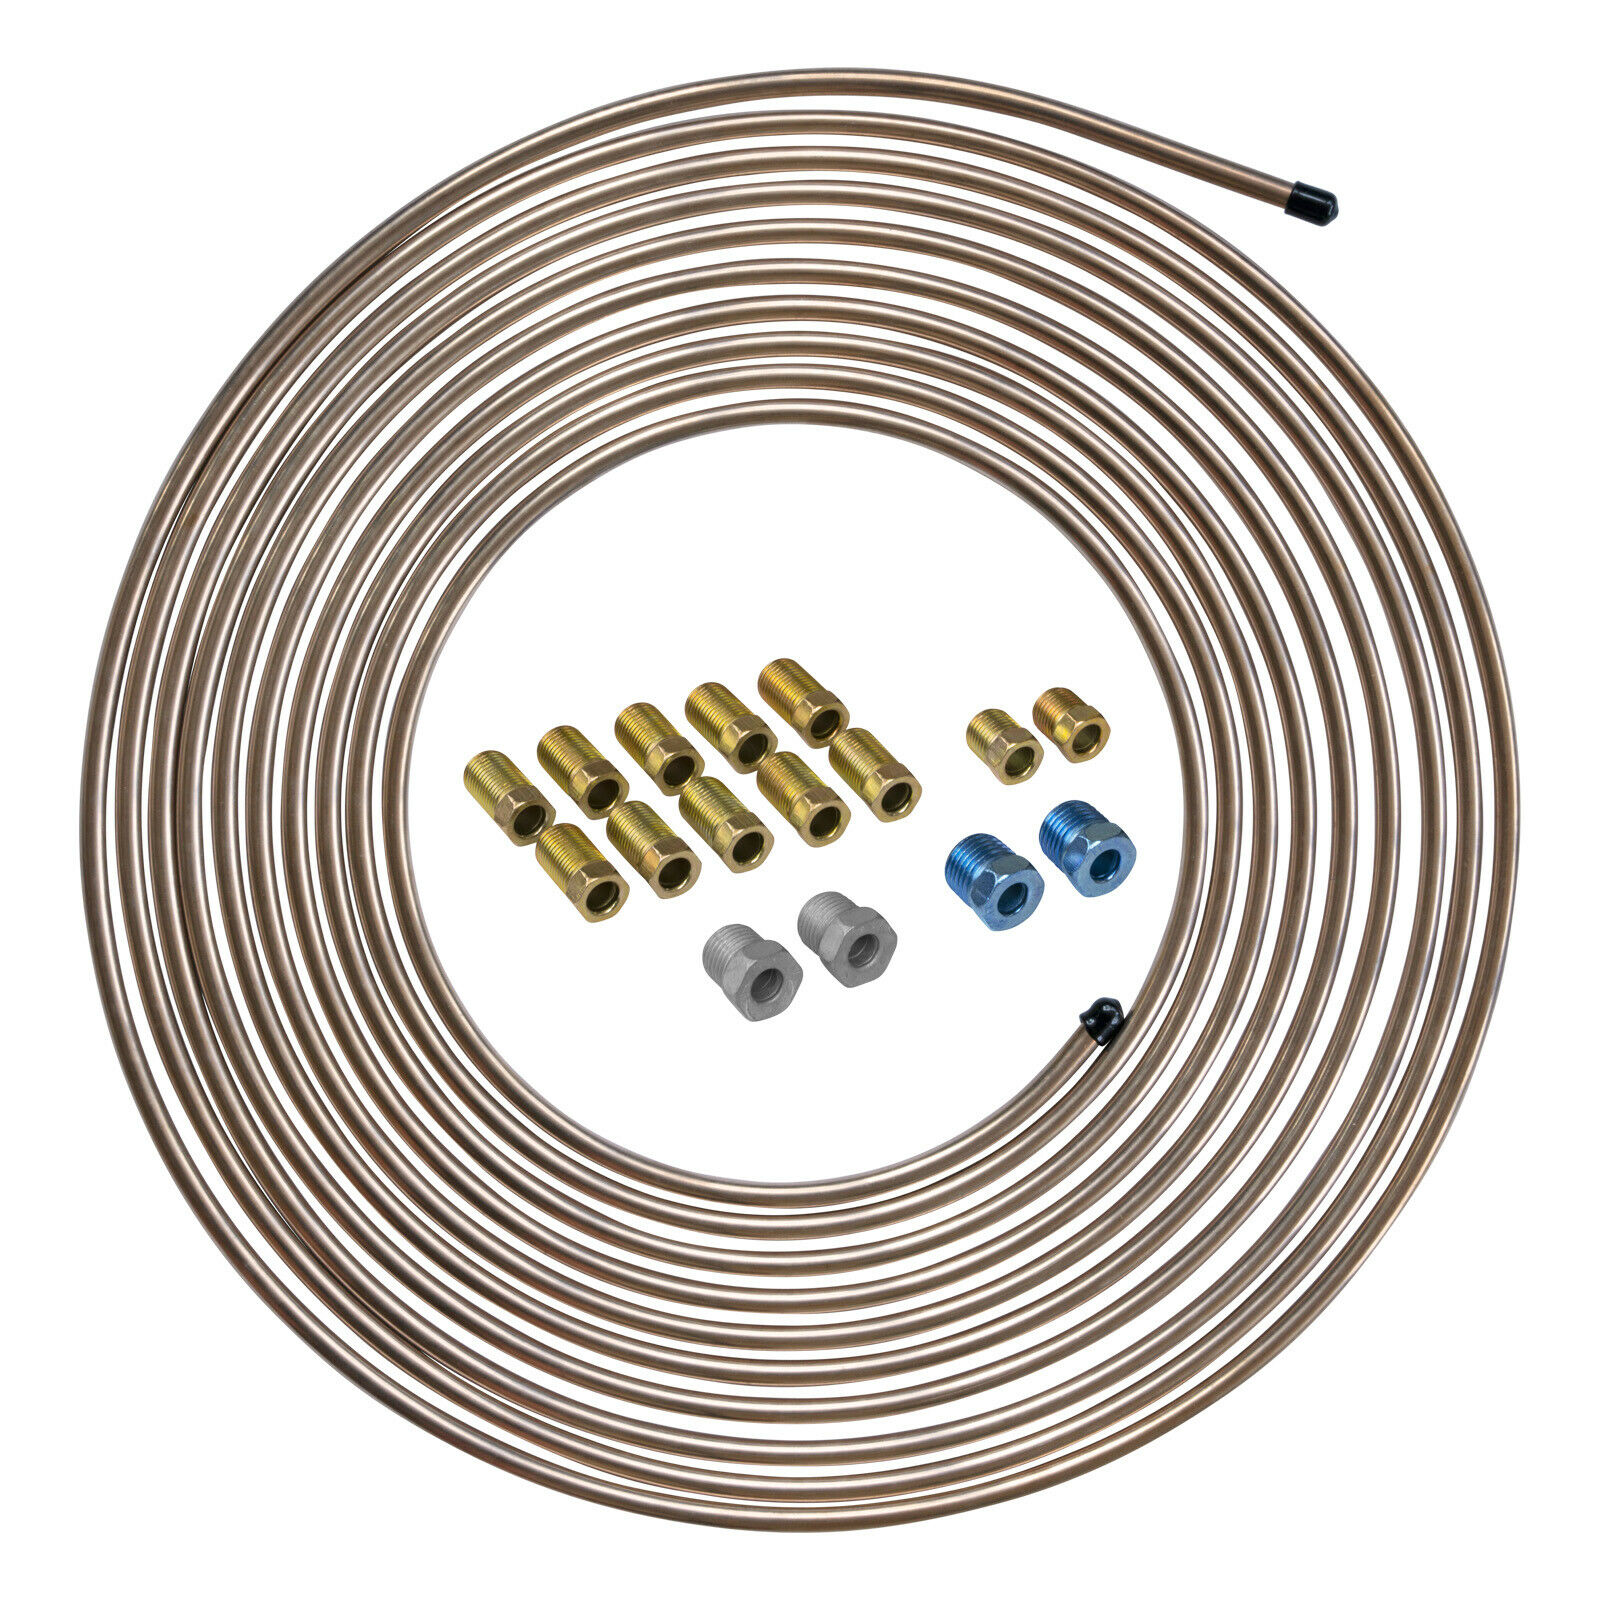 4lifetimelines 25 Ft 1/4 Copper Nickel Brake Line Replacement And Fitting Kit